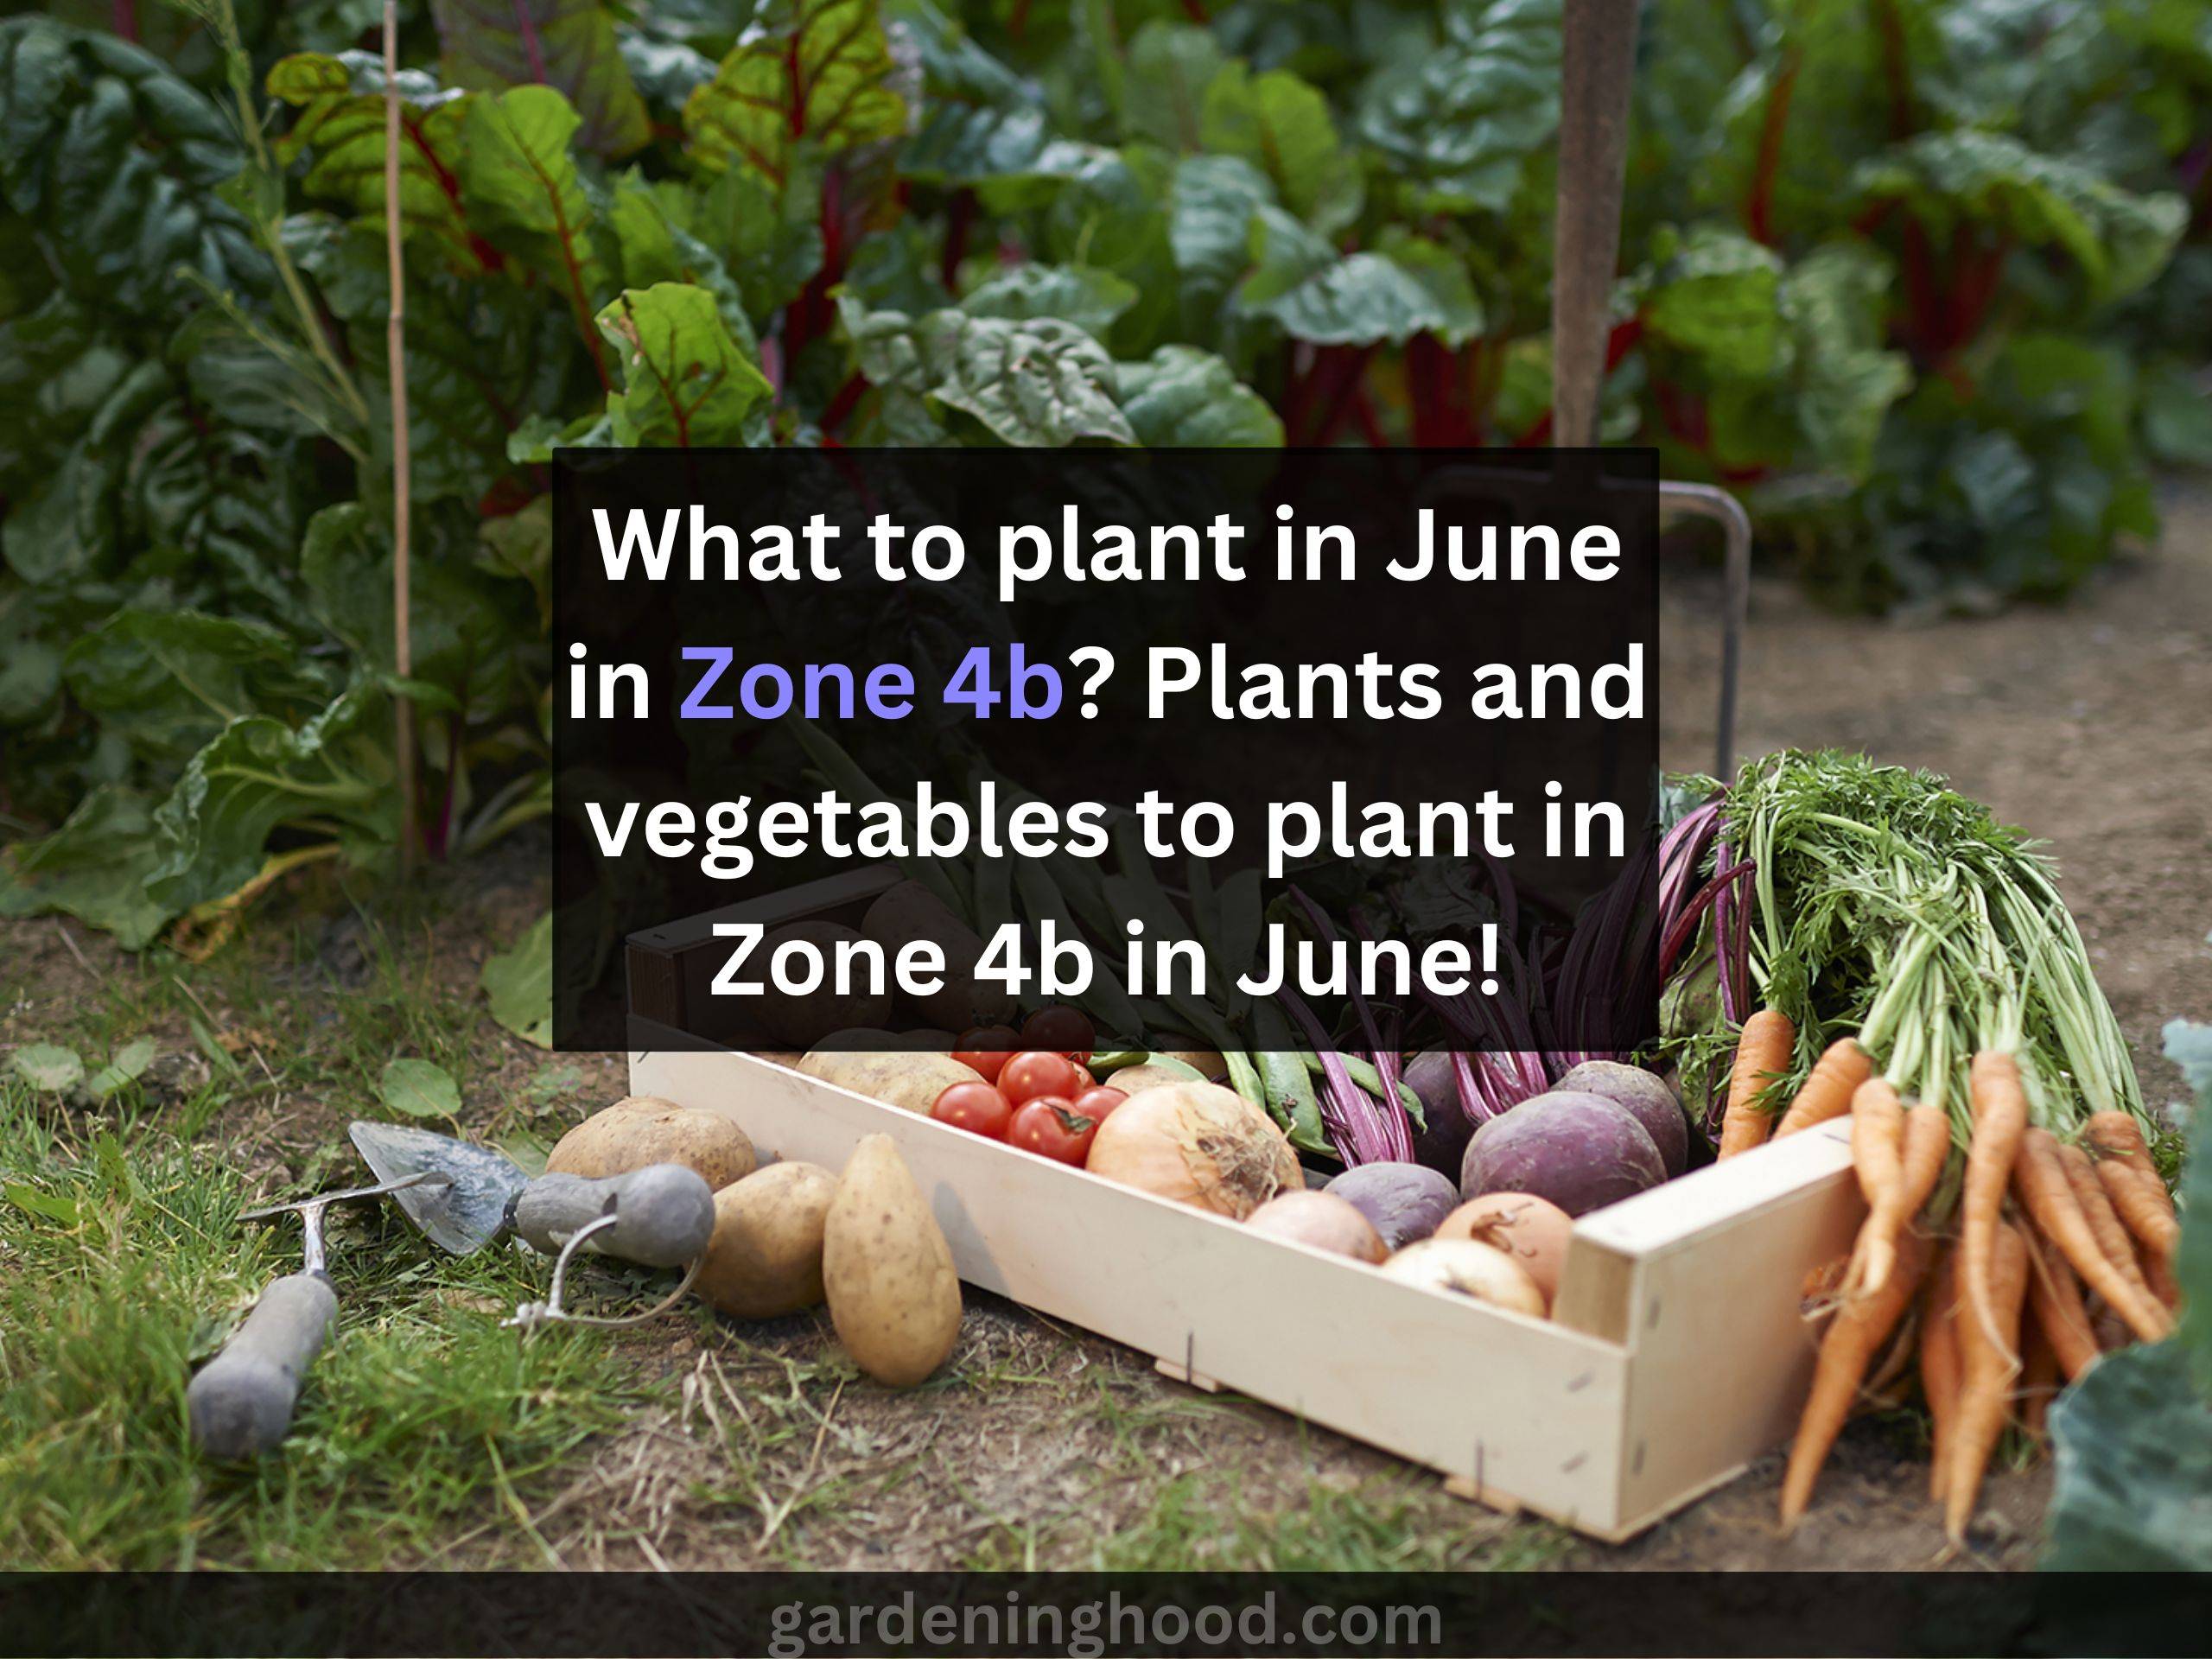 What to plant in June in Zone 4b? Plants and vegetables to plant in Zone 4b in June!